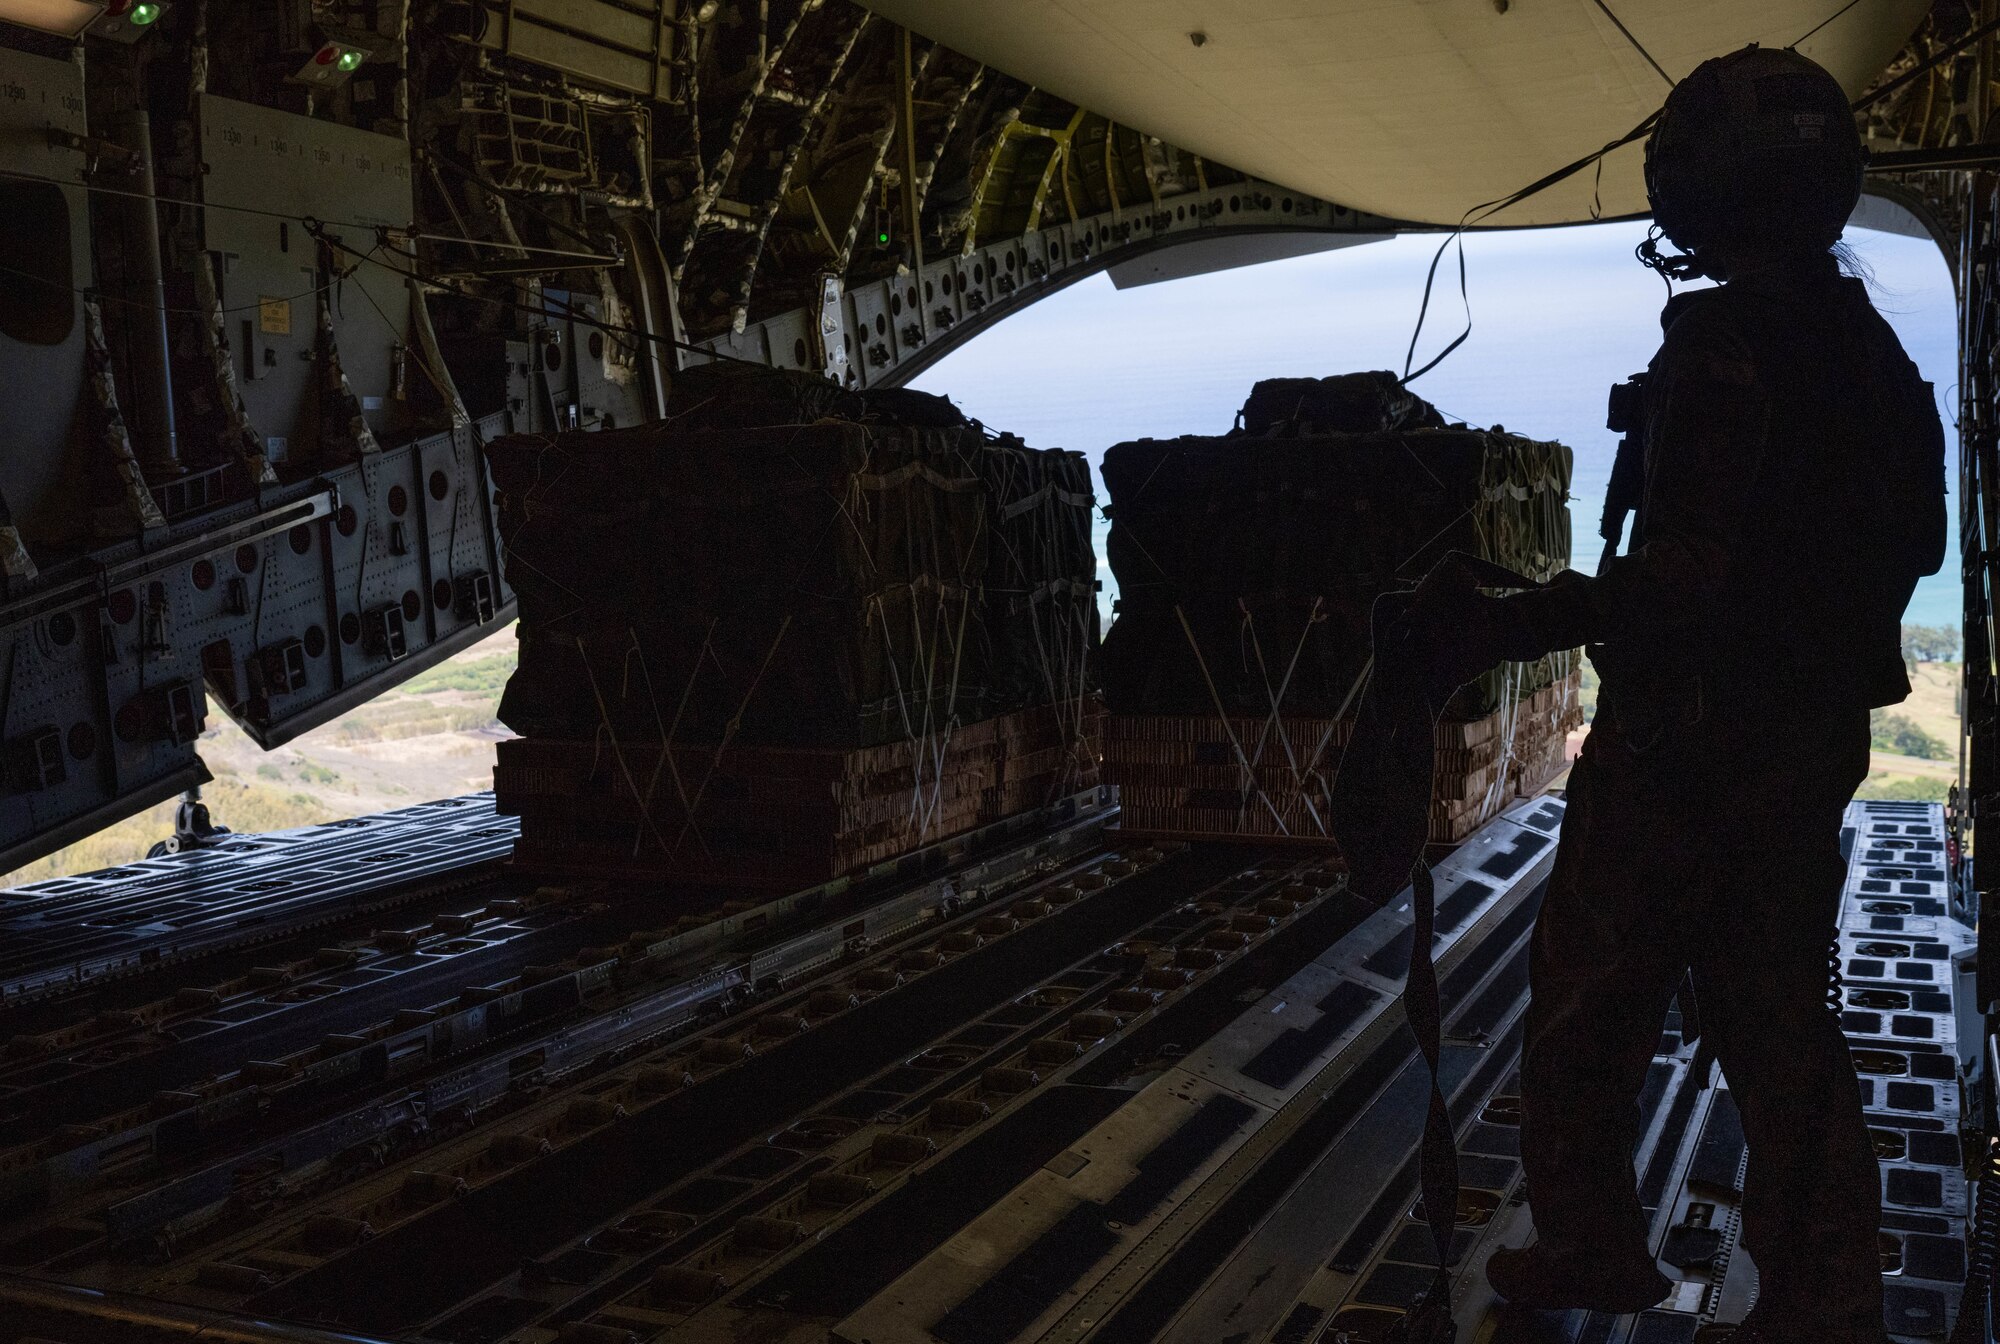 Senior Airman Jolan Besse, 535th Airlift Squadron loadmaster, observes container delivery system bundles exiting a C-17 Globemaster III during an airdrop training exercise at Kane’s Drop Zone, Kahuku, Hawaii, Aug. 24, 2022. Aircrew from the 535th Airlift squadron conducted training by performing an airdrop of container delivery system bundles of supplies. (U.S. Air Force photo by Senior Airman Makensie Cooper)